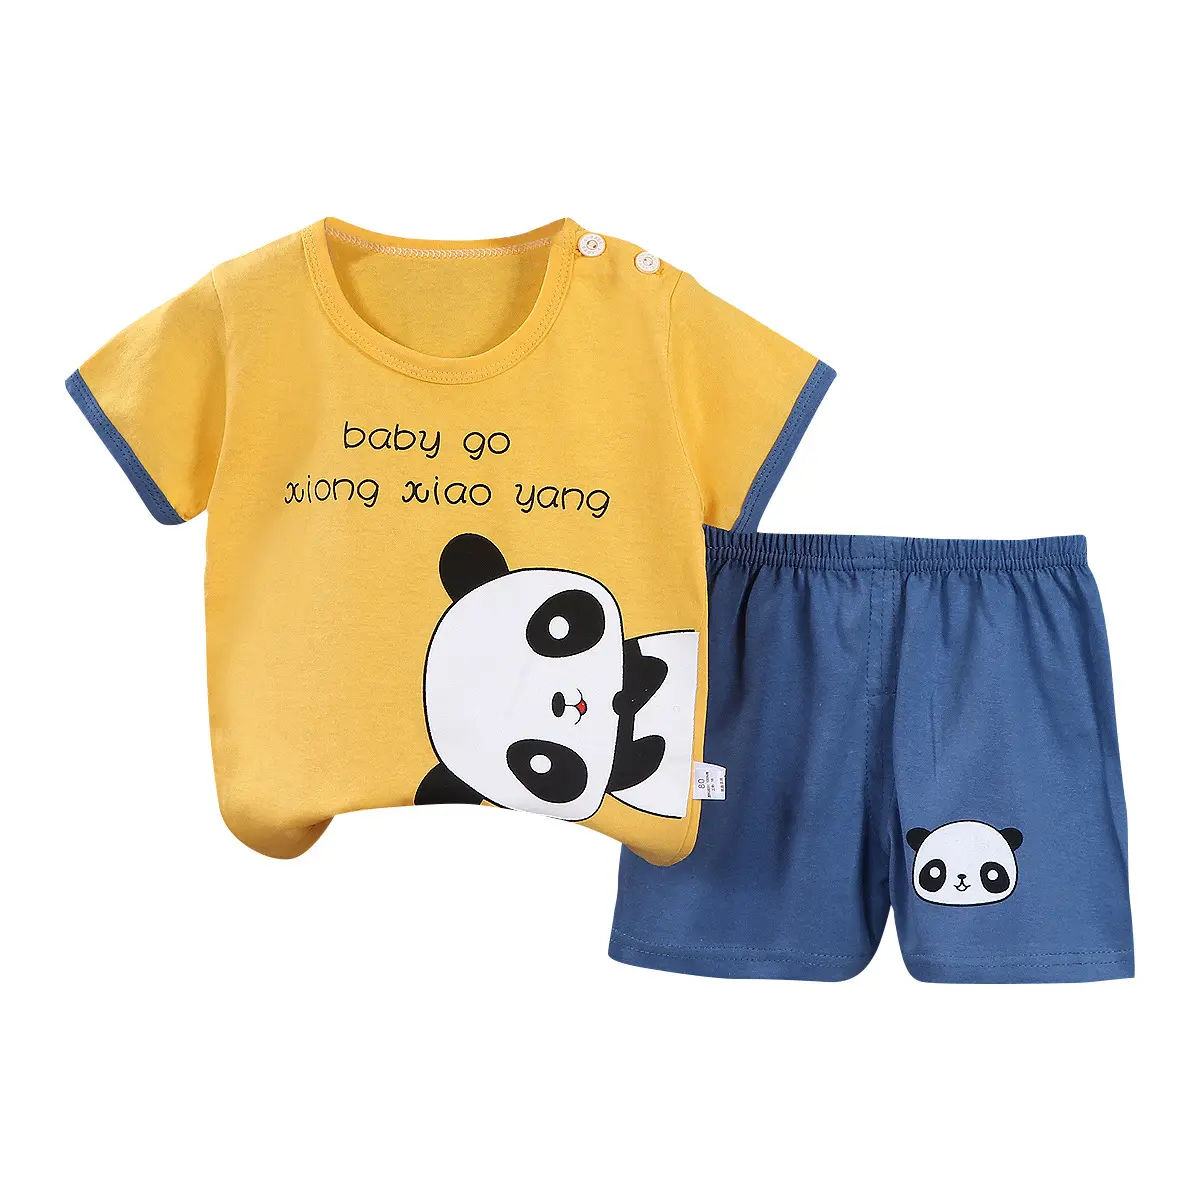 Toddler Summer Sets Cotton Newborn Baby Short Sleeved Clothes Cartoon Baby Boy Clothing Sets